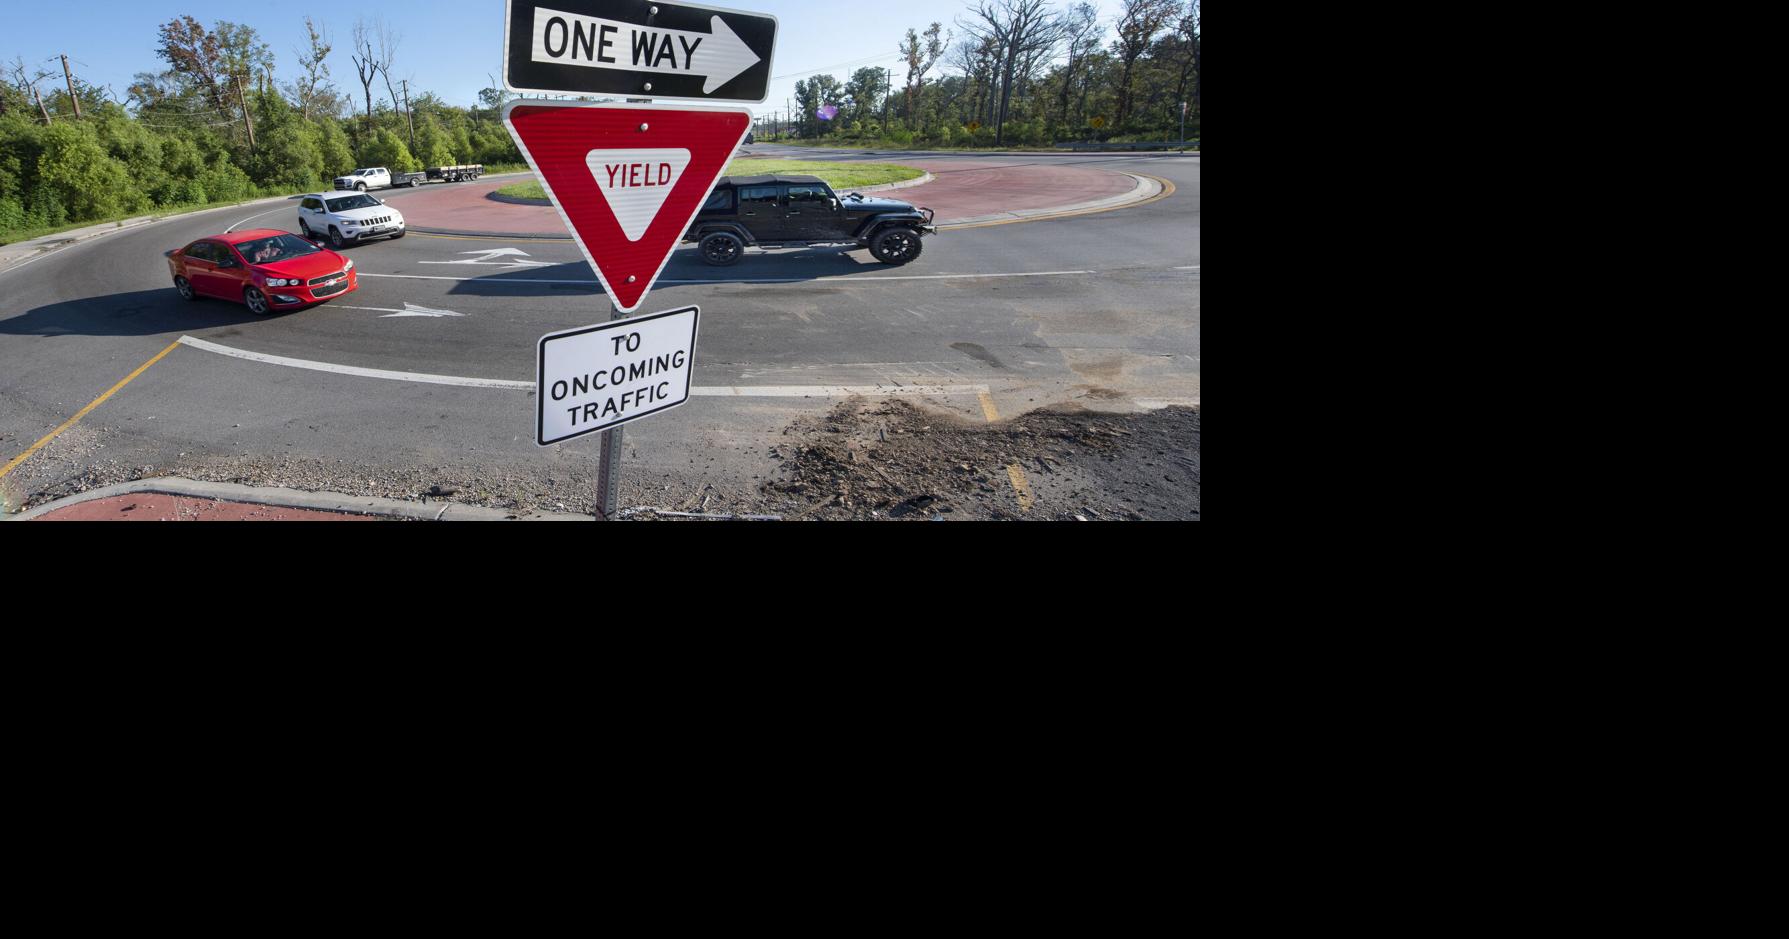 Roundabouts are appearing all over state but do drivers like them? DOTD says signs point to yes